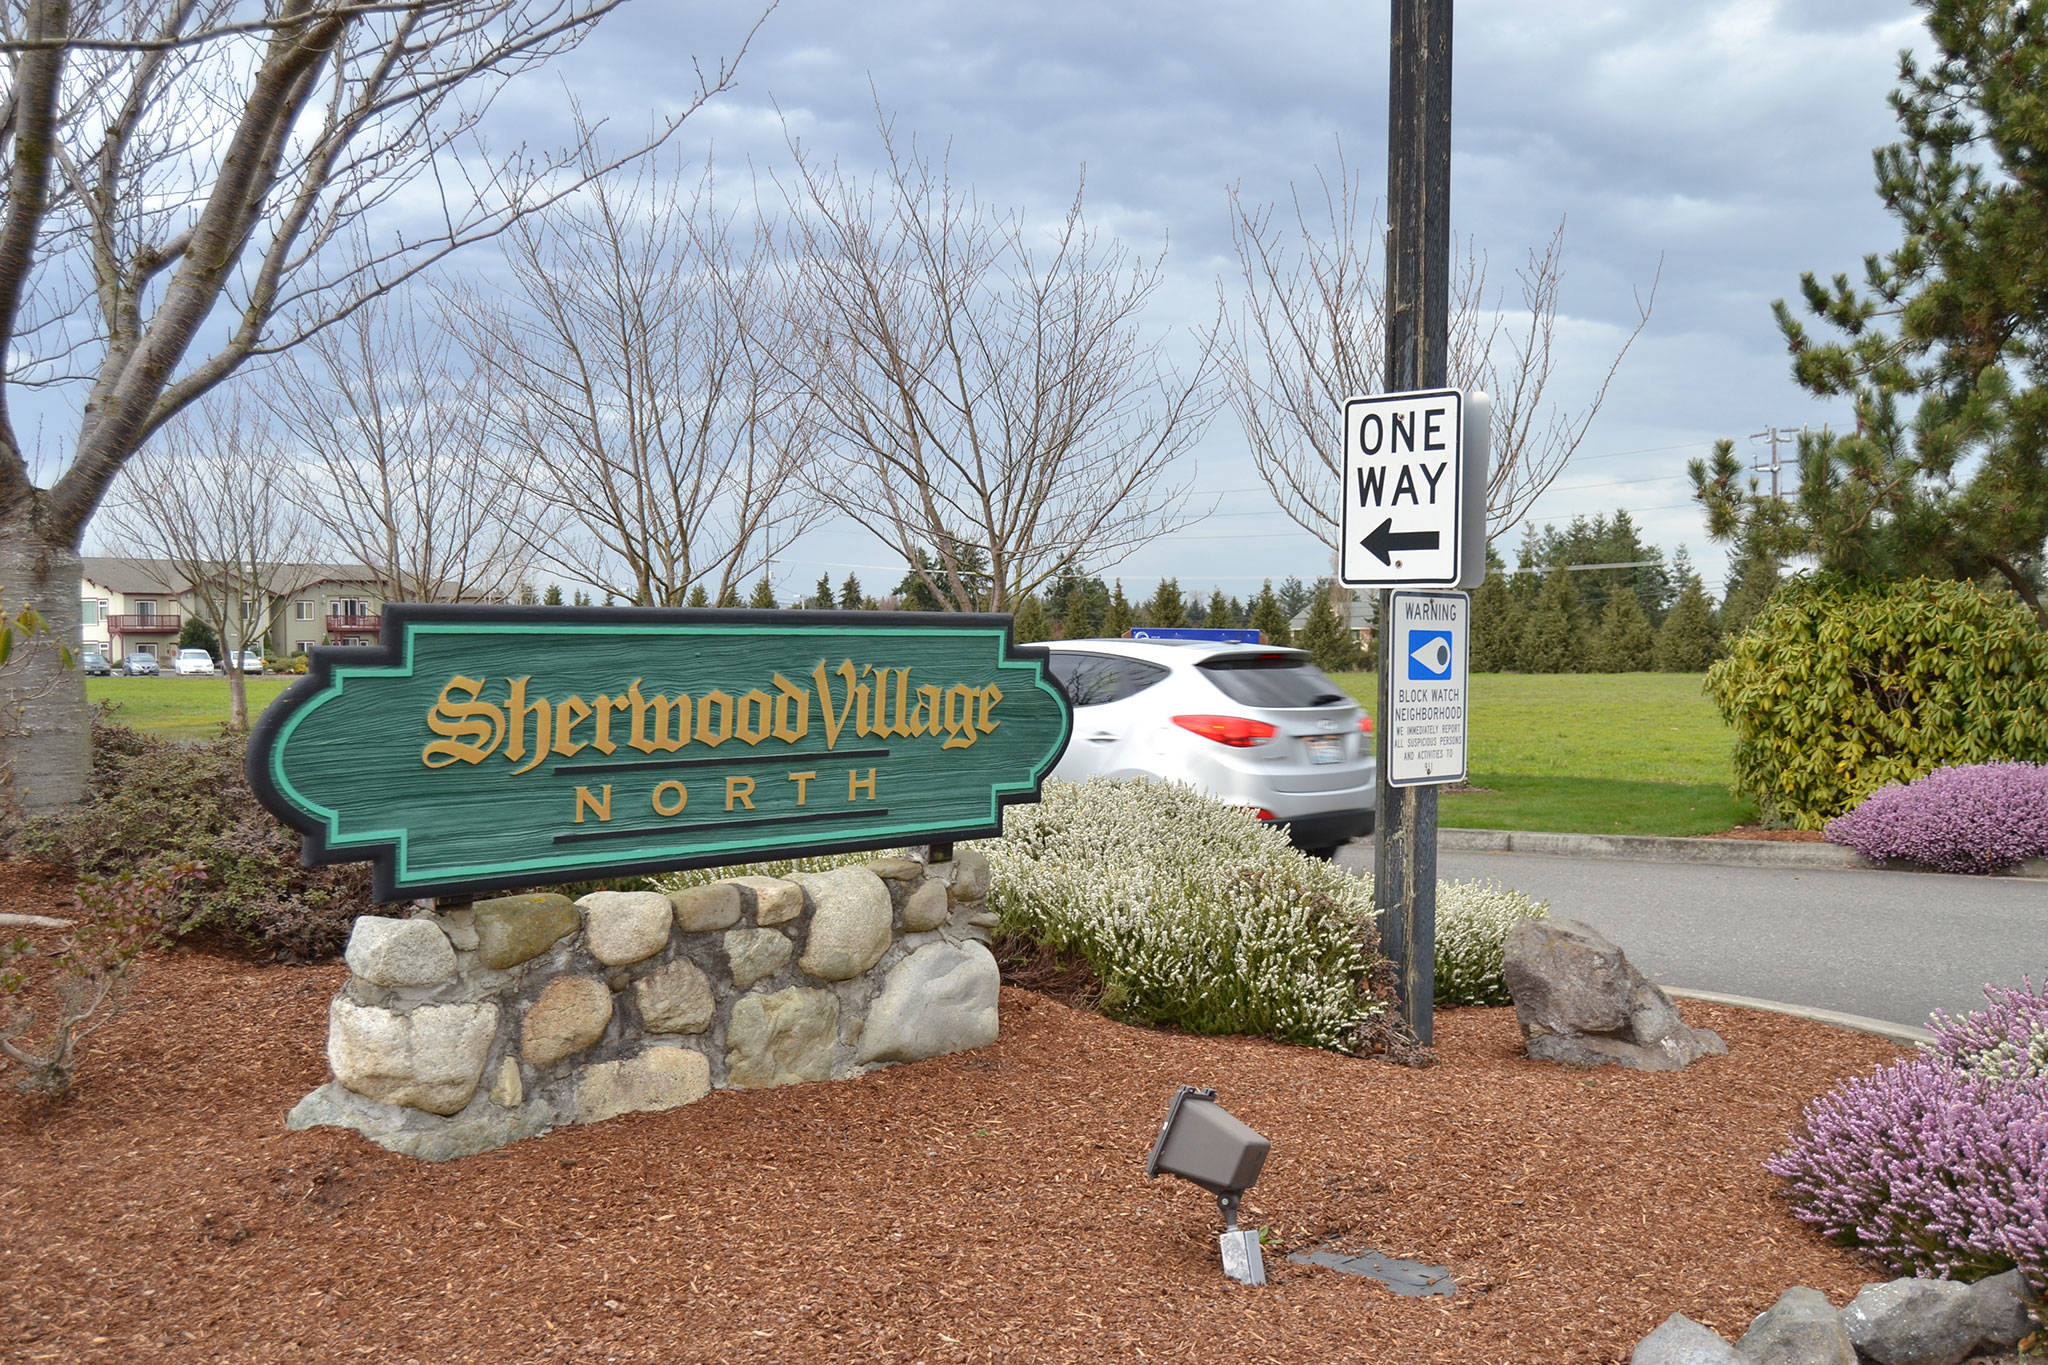 Sequim City Councilors unanimously approved construction for the final portion of Sherwood Village on March 12. Devon Court will feature 10 buildings with 20 condos for senior citizens looking for more affordable housing, says its developer Bill Littlejohn. Sequim Gazette photo by Matthew Nash